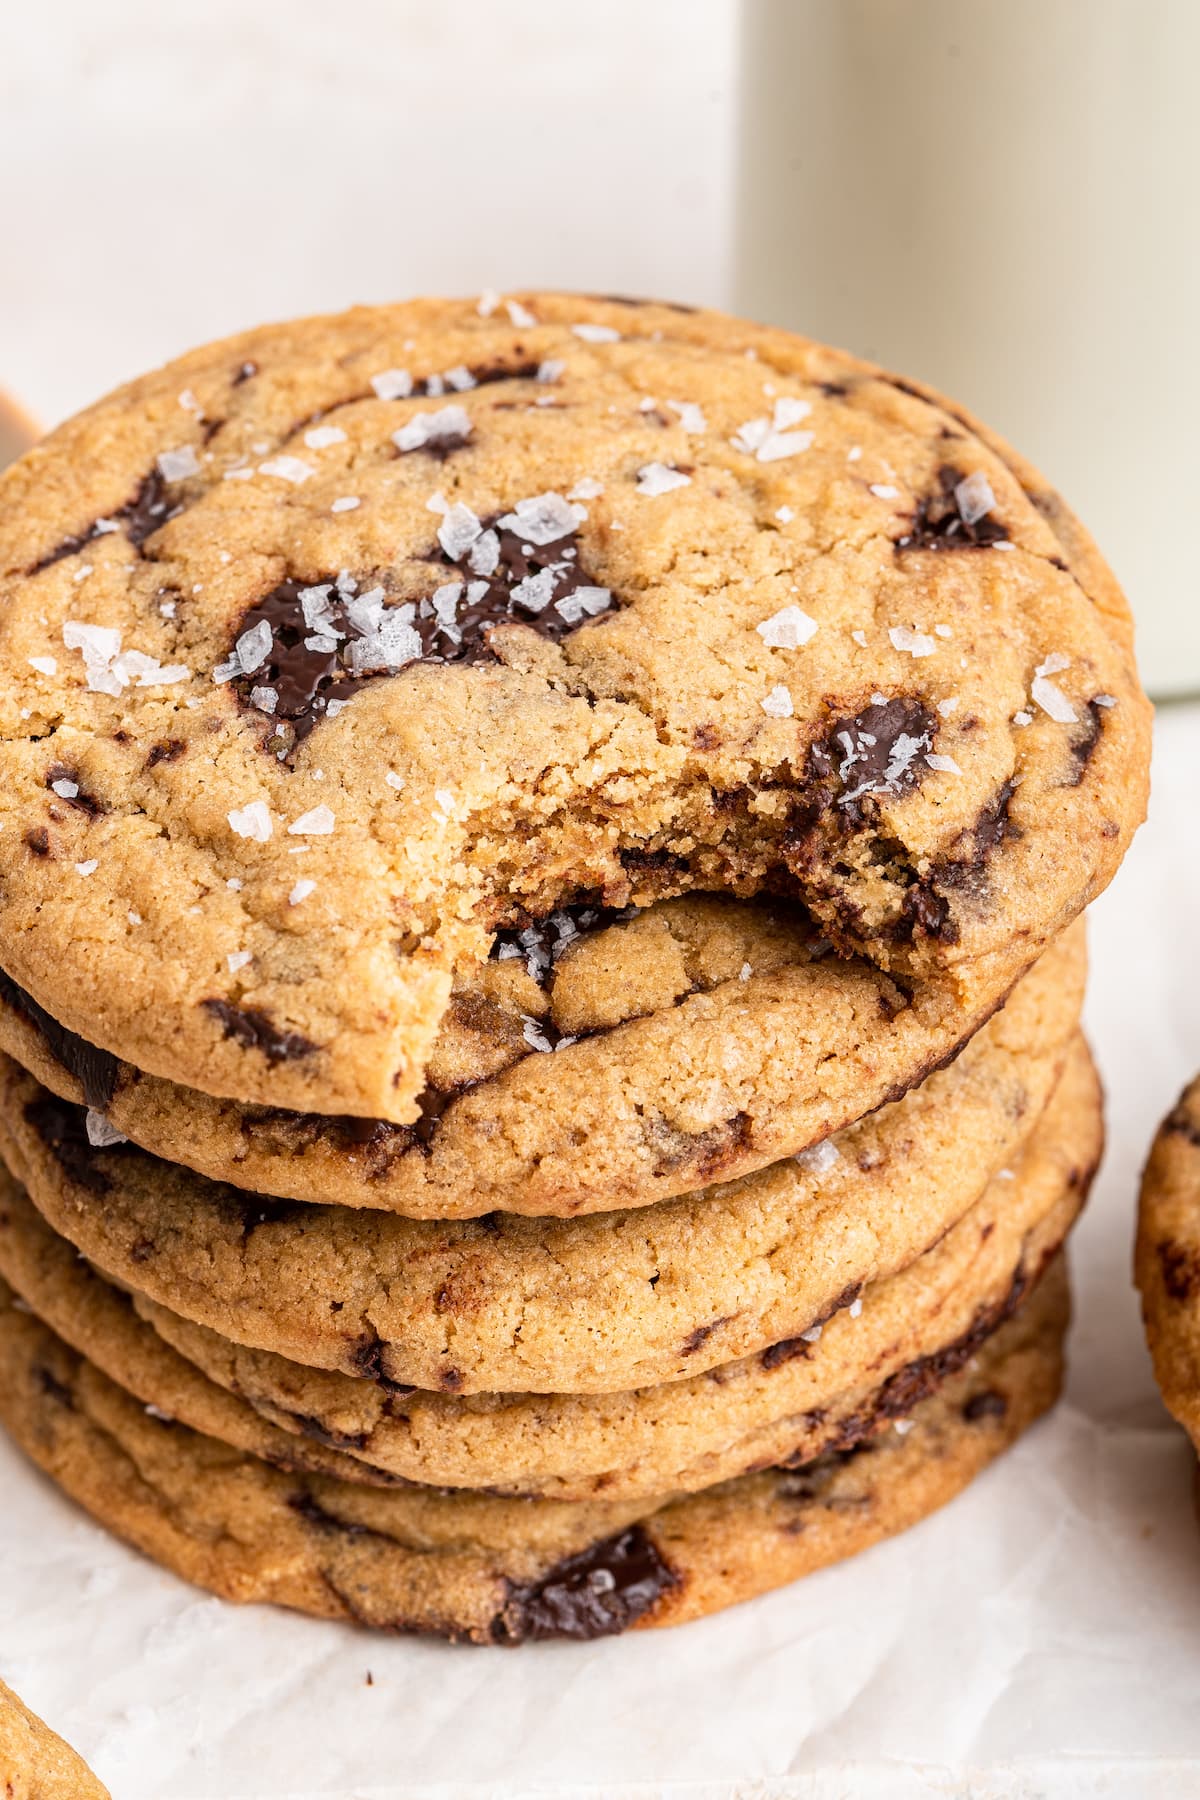 Brown butter chocolate chip cookies stacked on one another with the top cookie having a small bite taken from it.